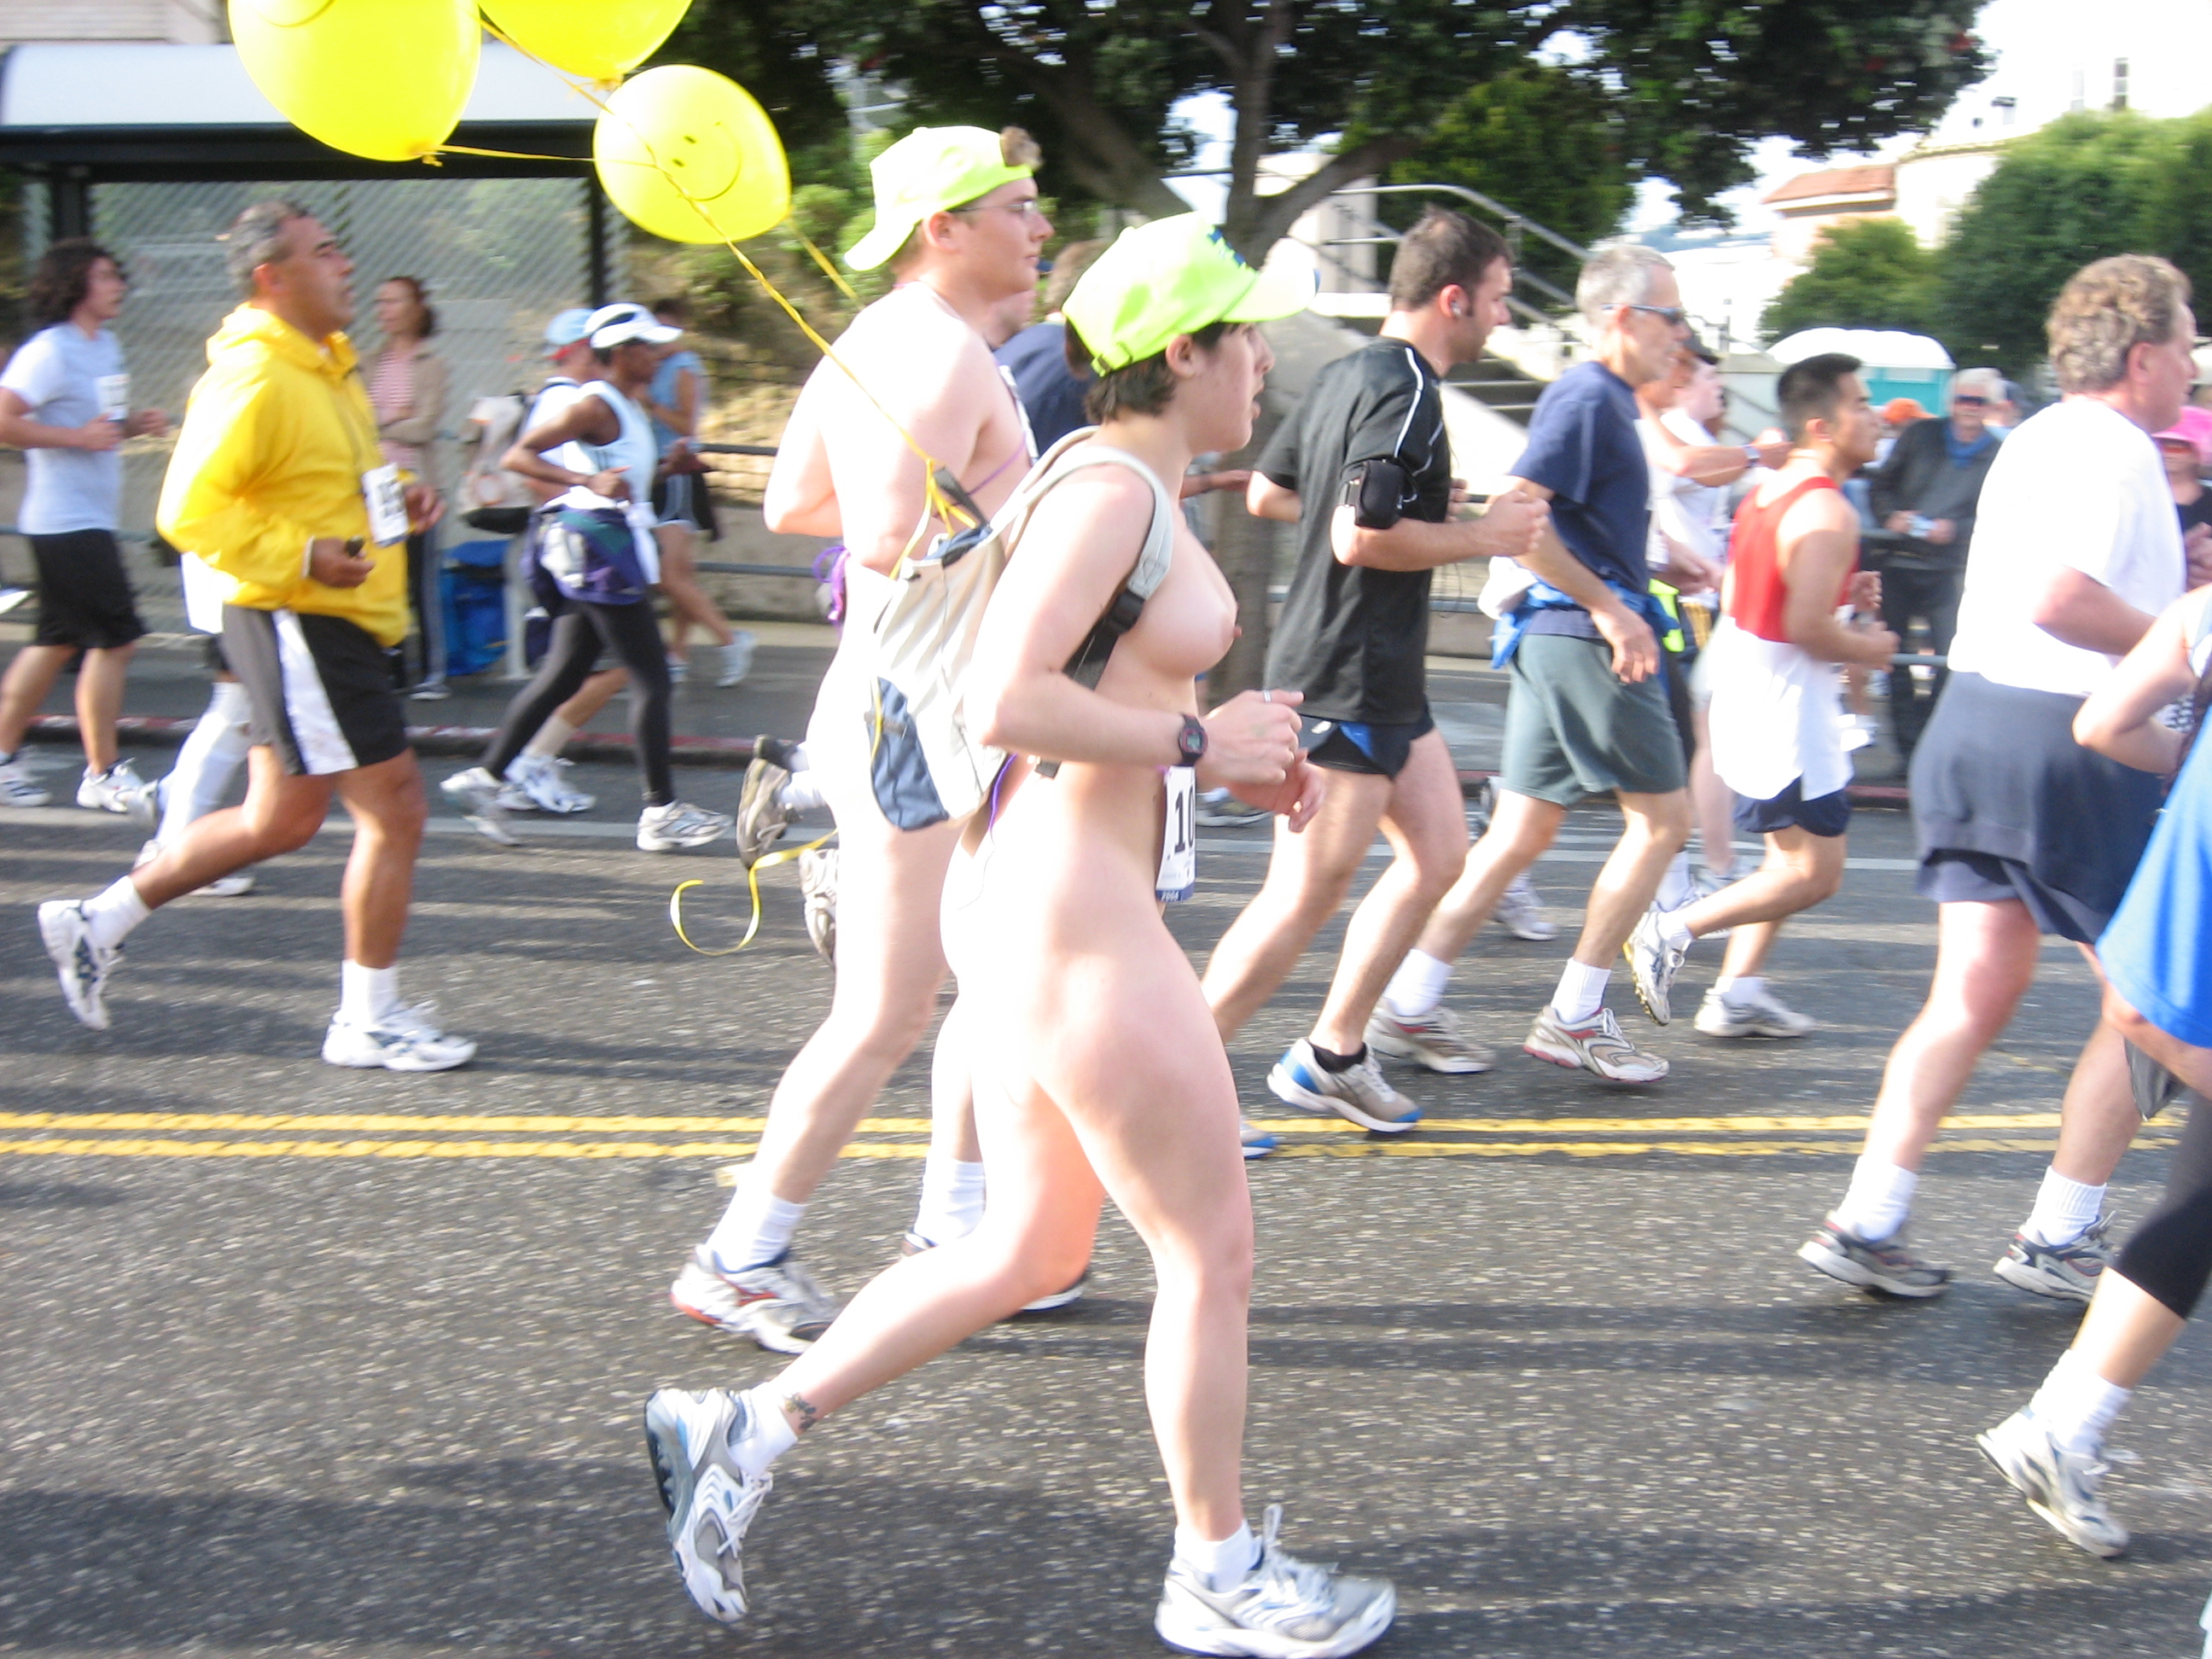 Nude Running Events 25